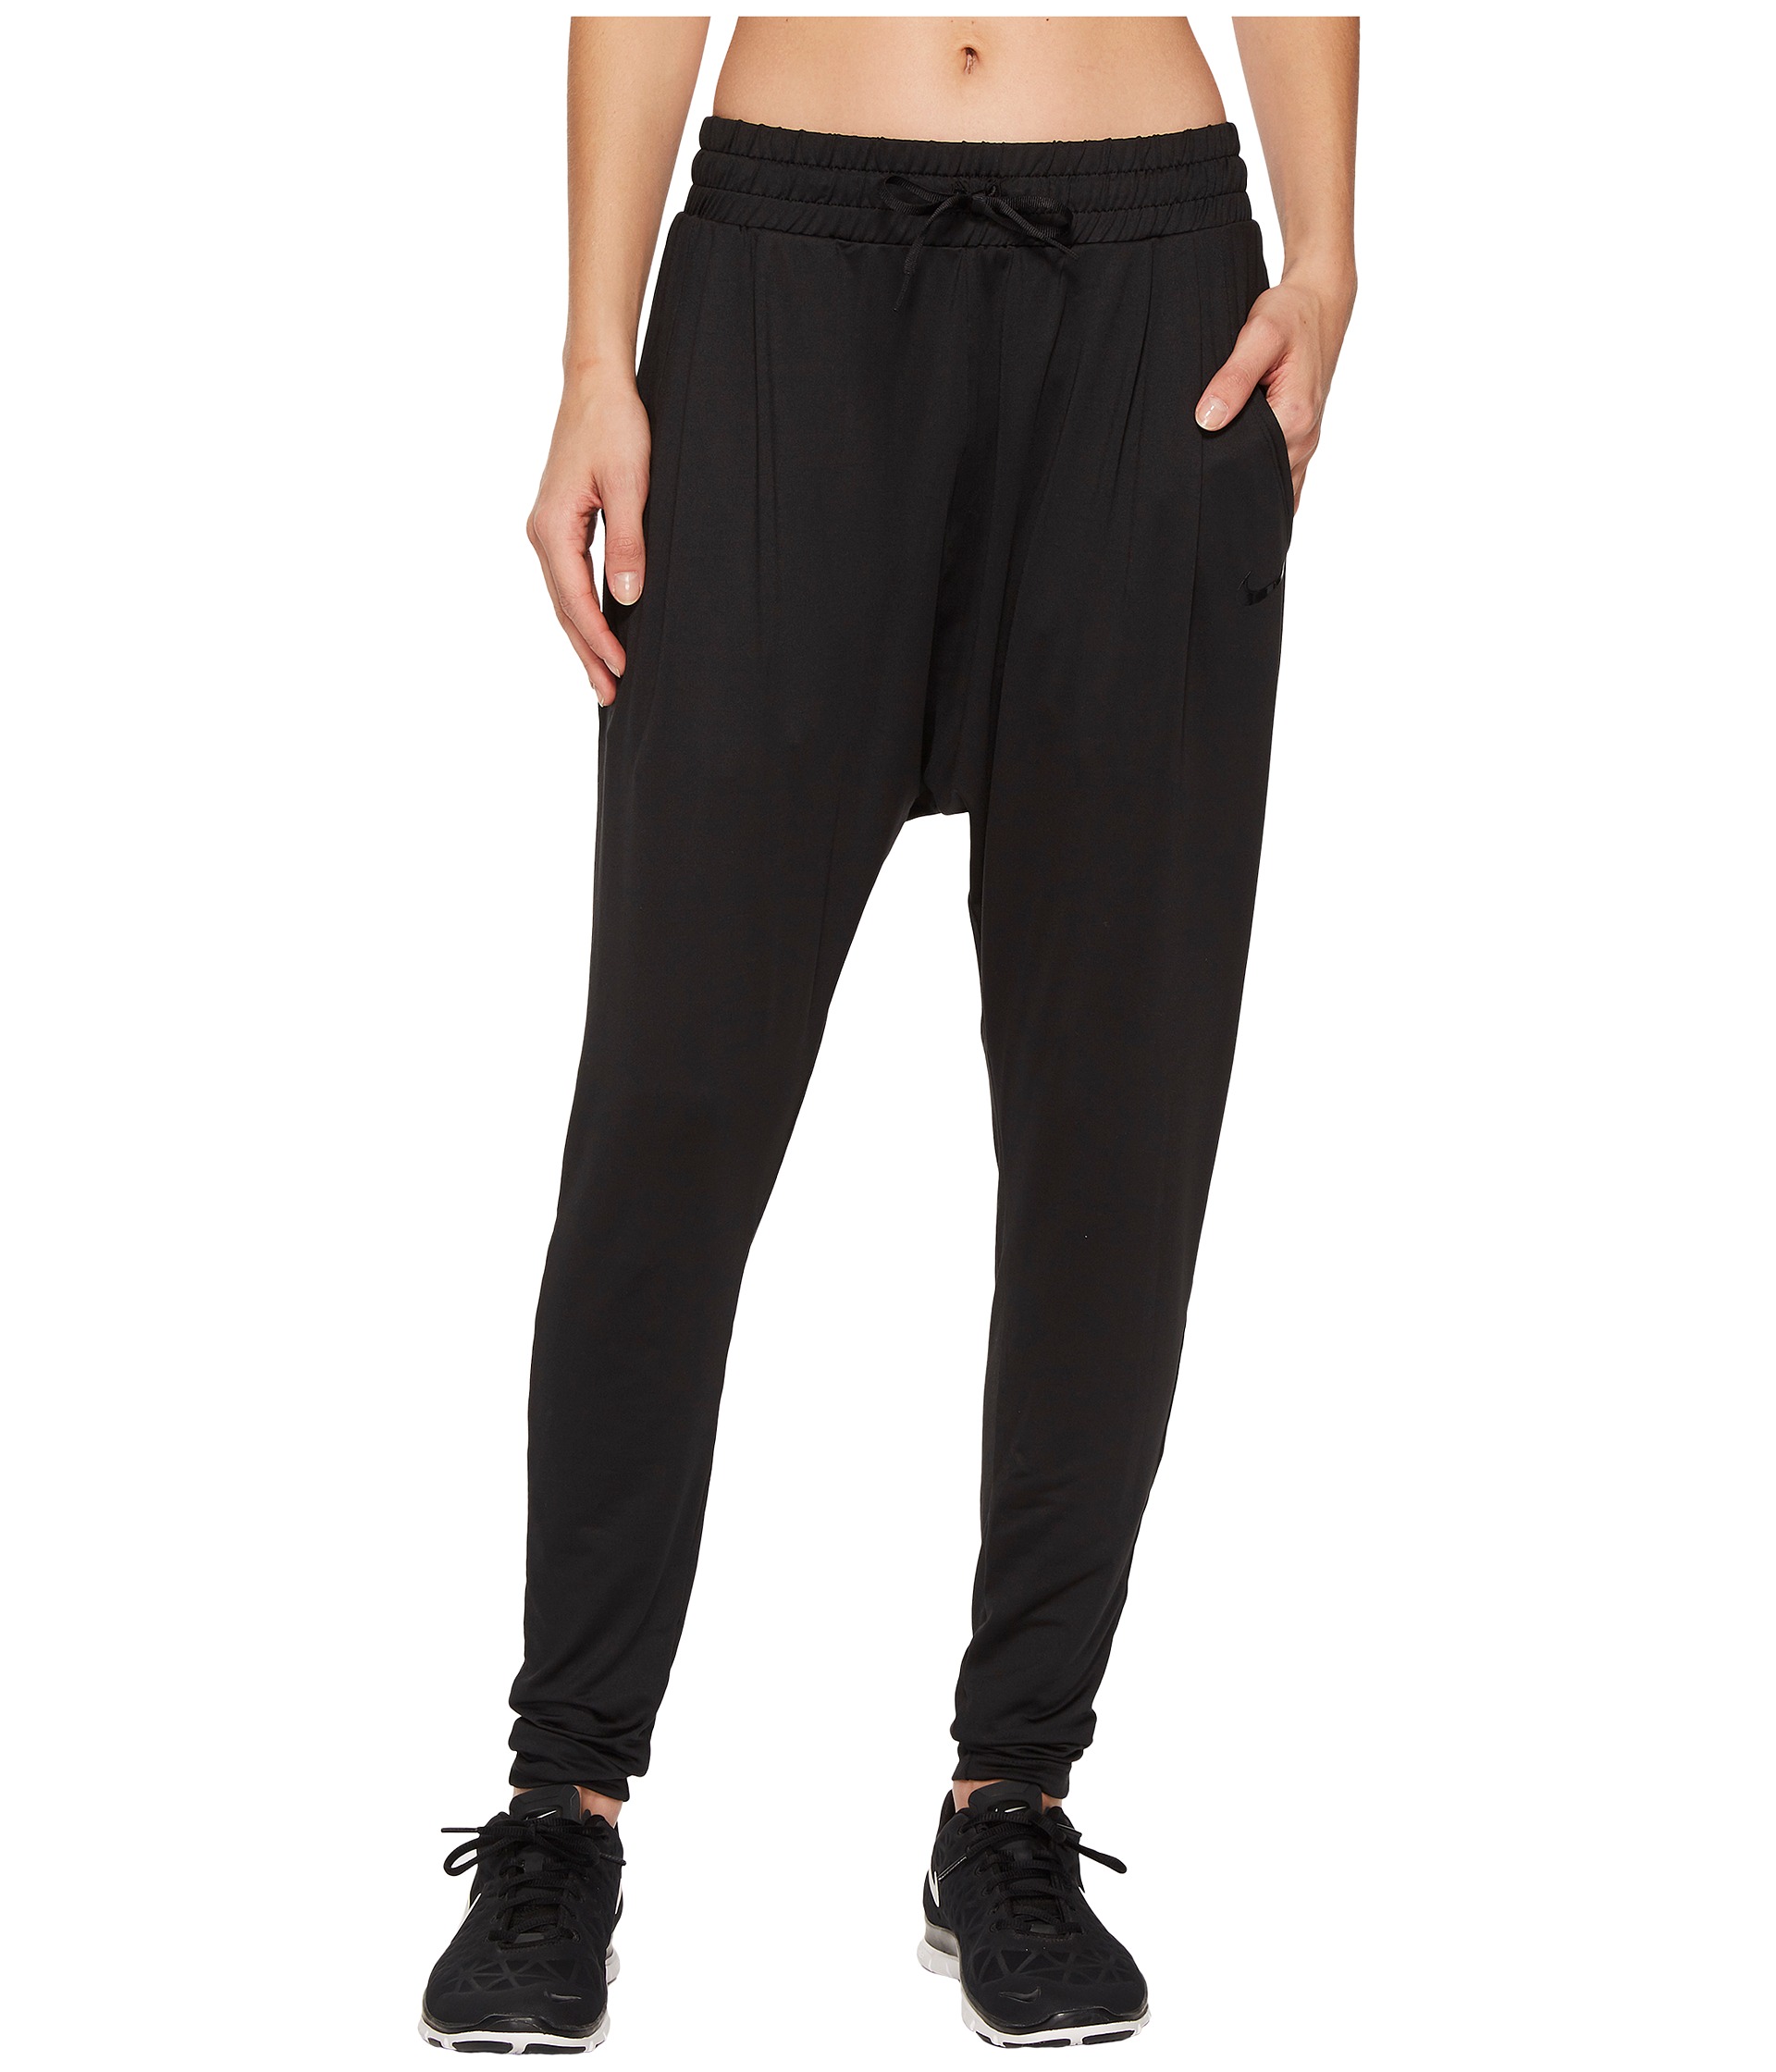 Nike Dry Flow Lux Pant at Zappos.com